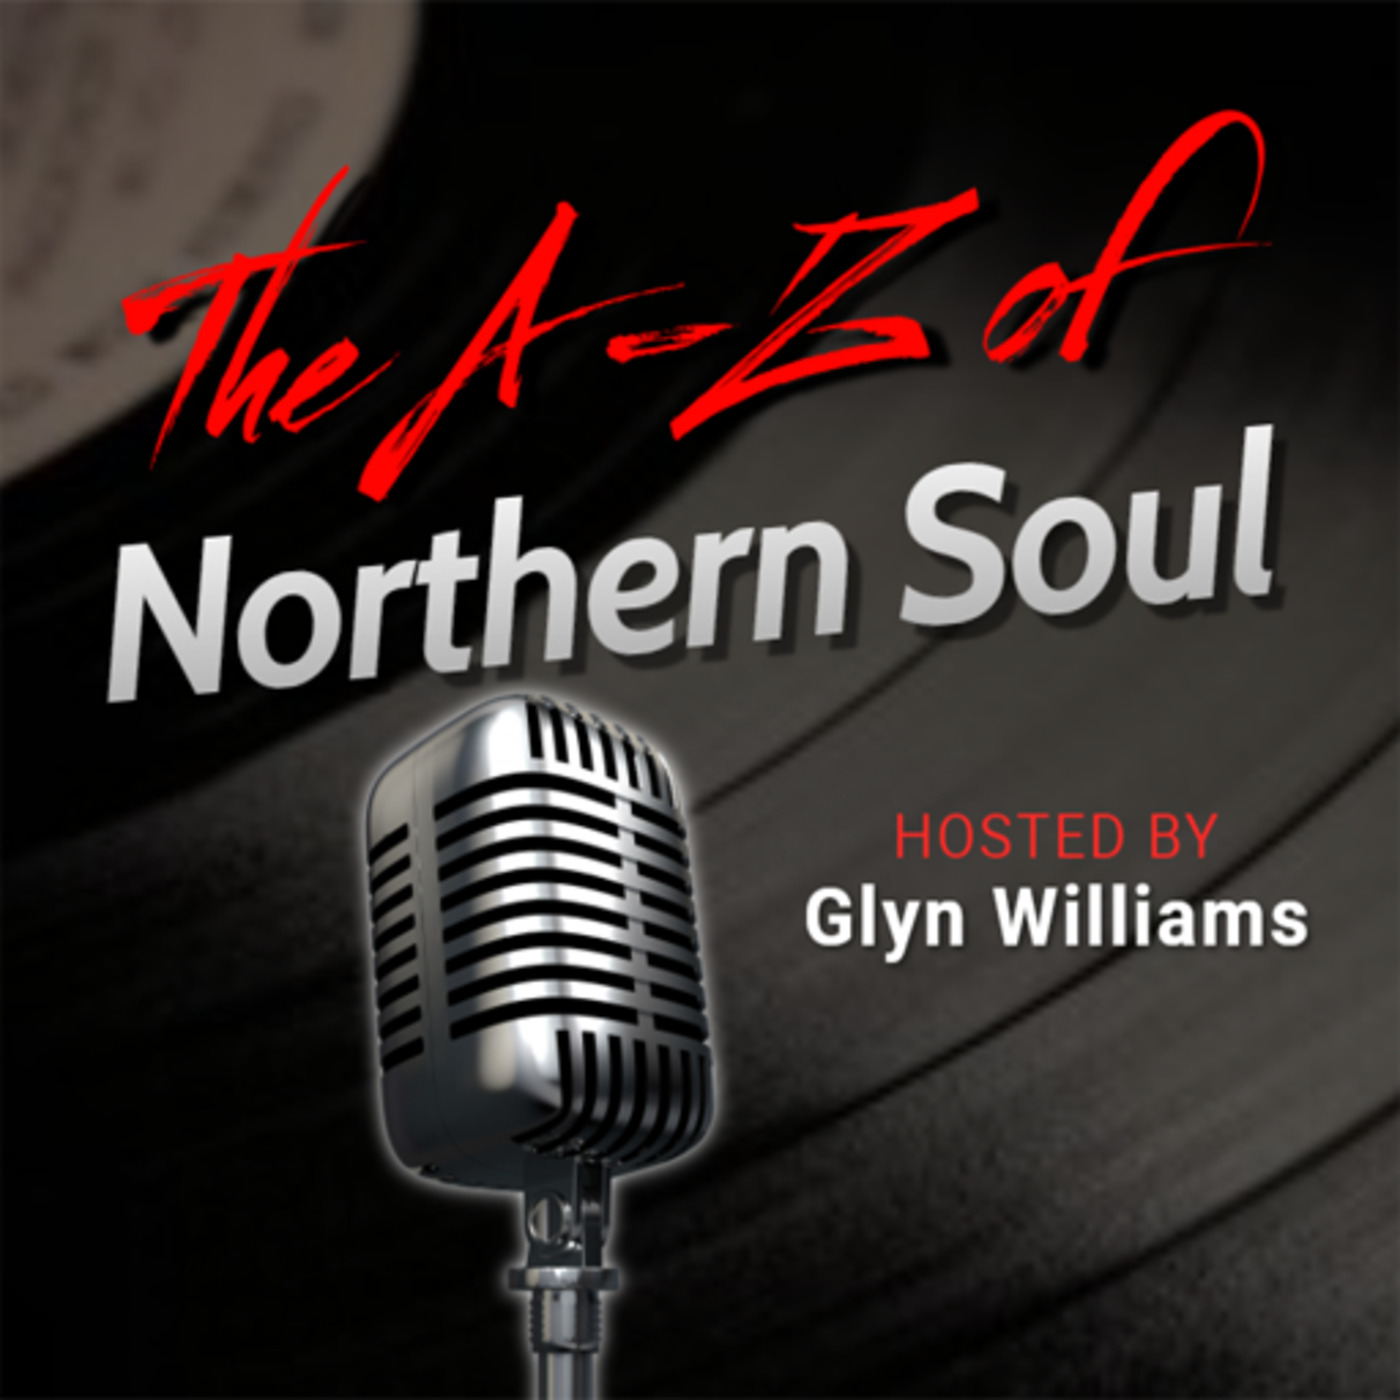 The A-Z of Northern Soul E041